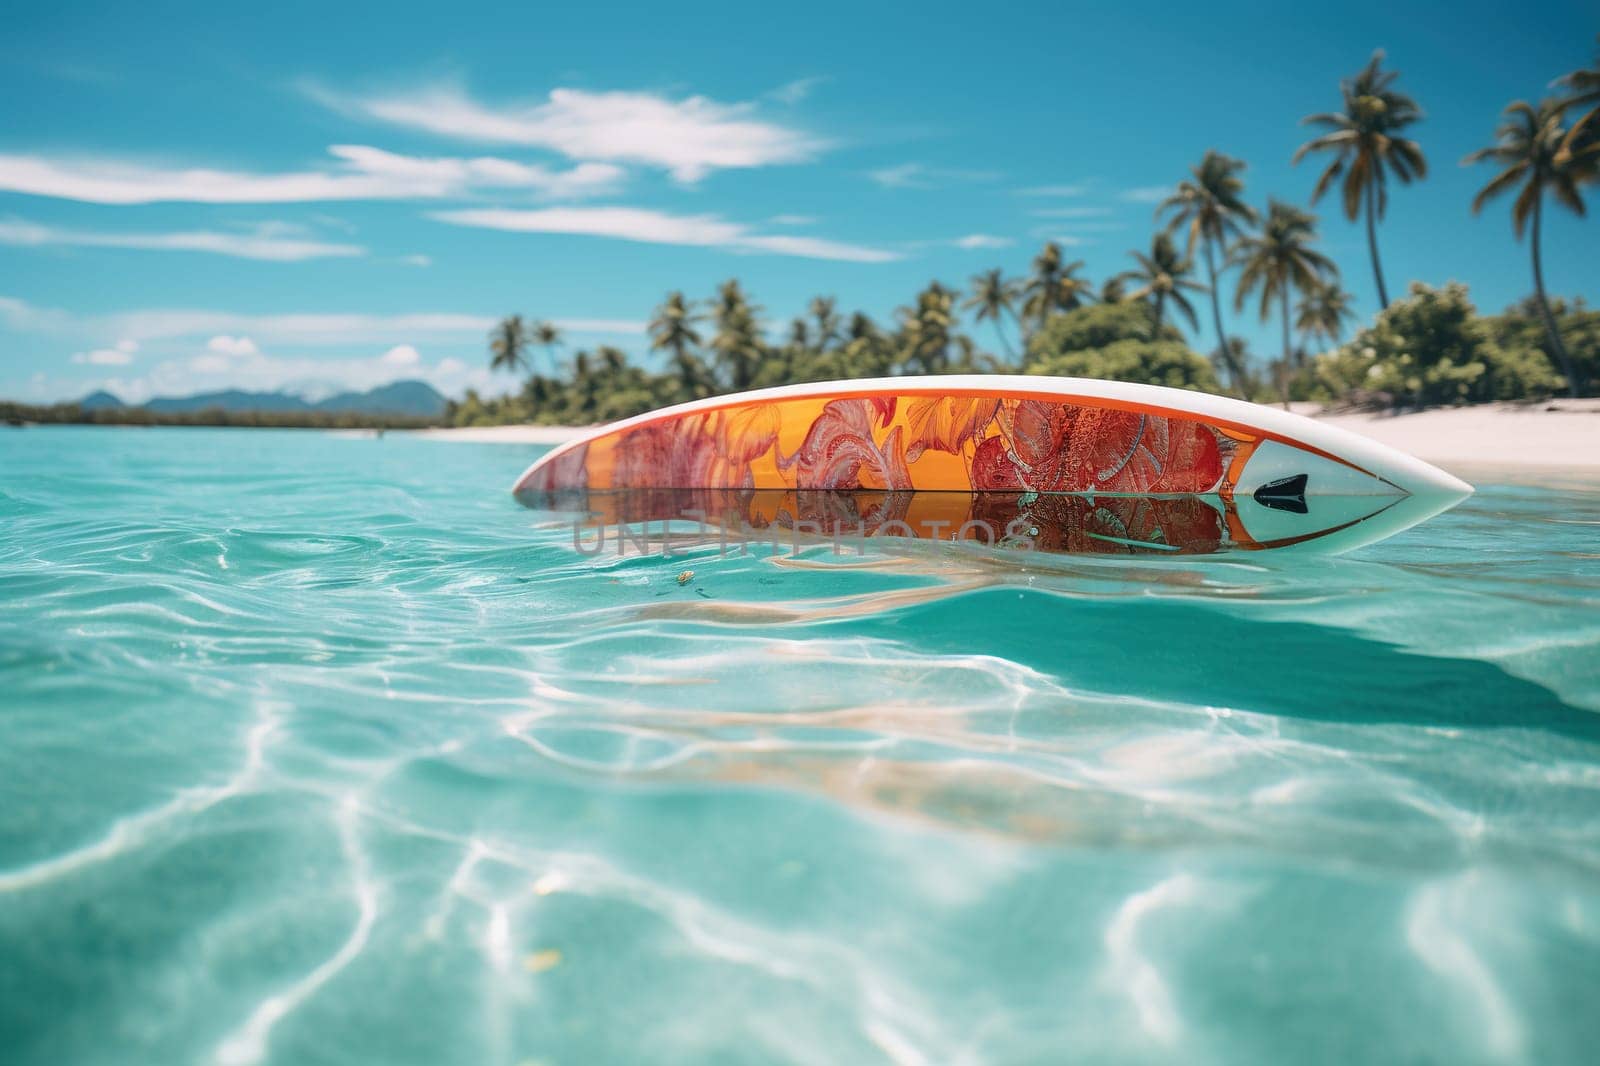 Surfboard in crystal clear water next to the beach and palm trees. Water sports. Leisure.